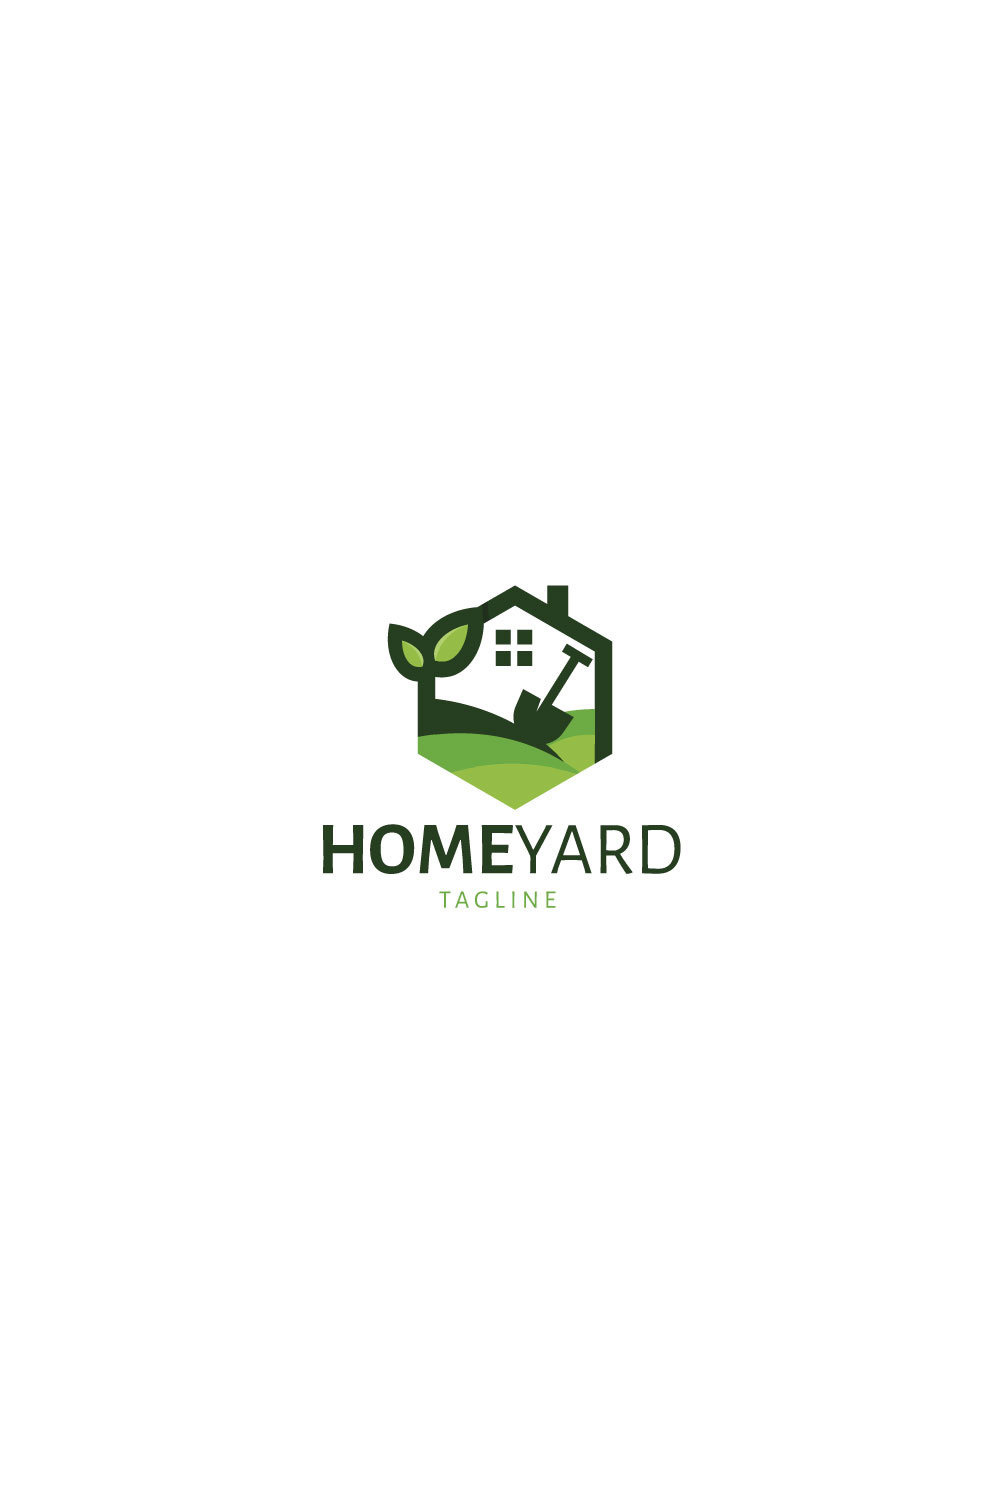 Home Yard logo pinterest preview image.